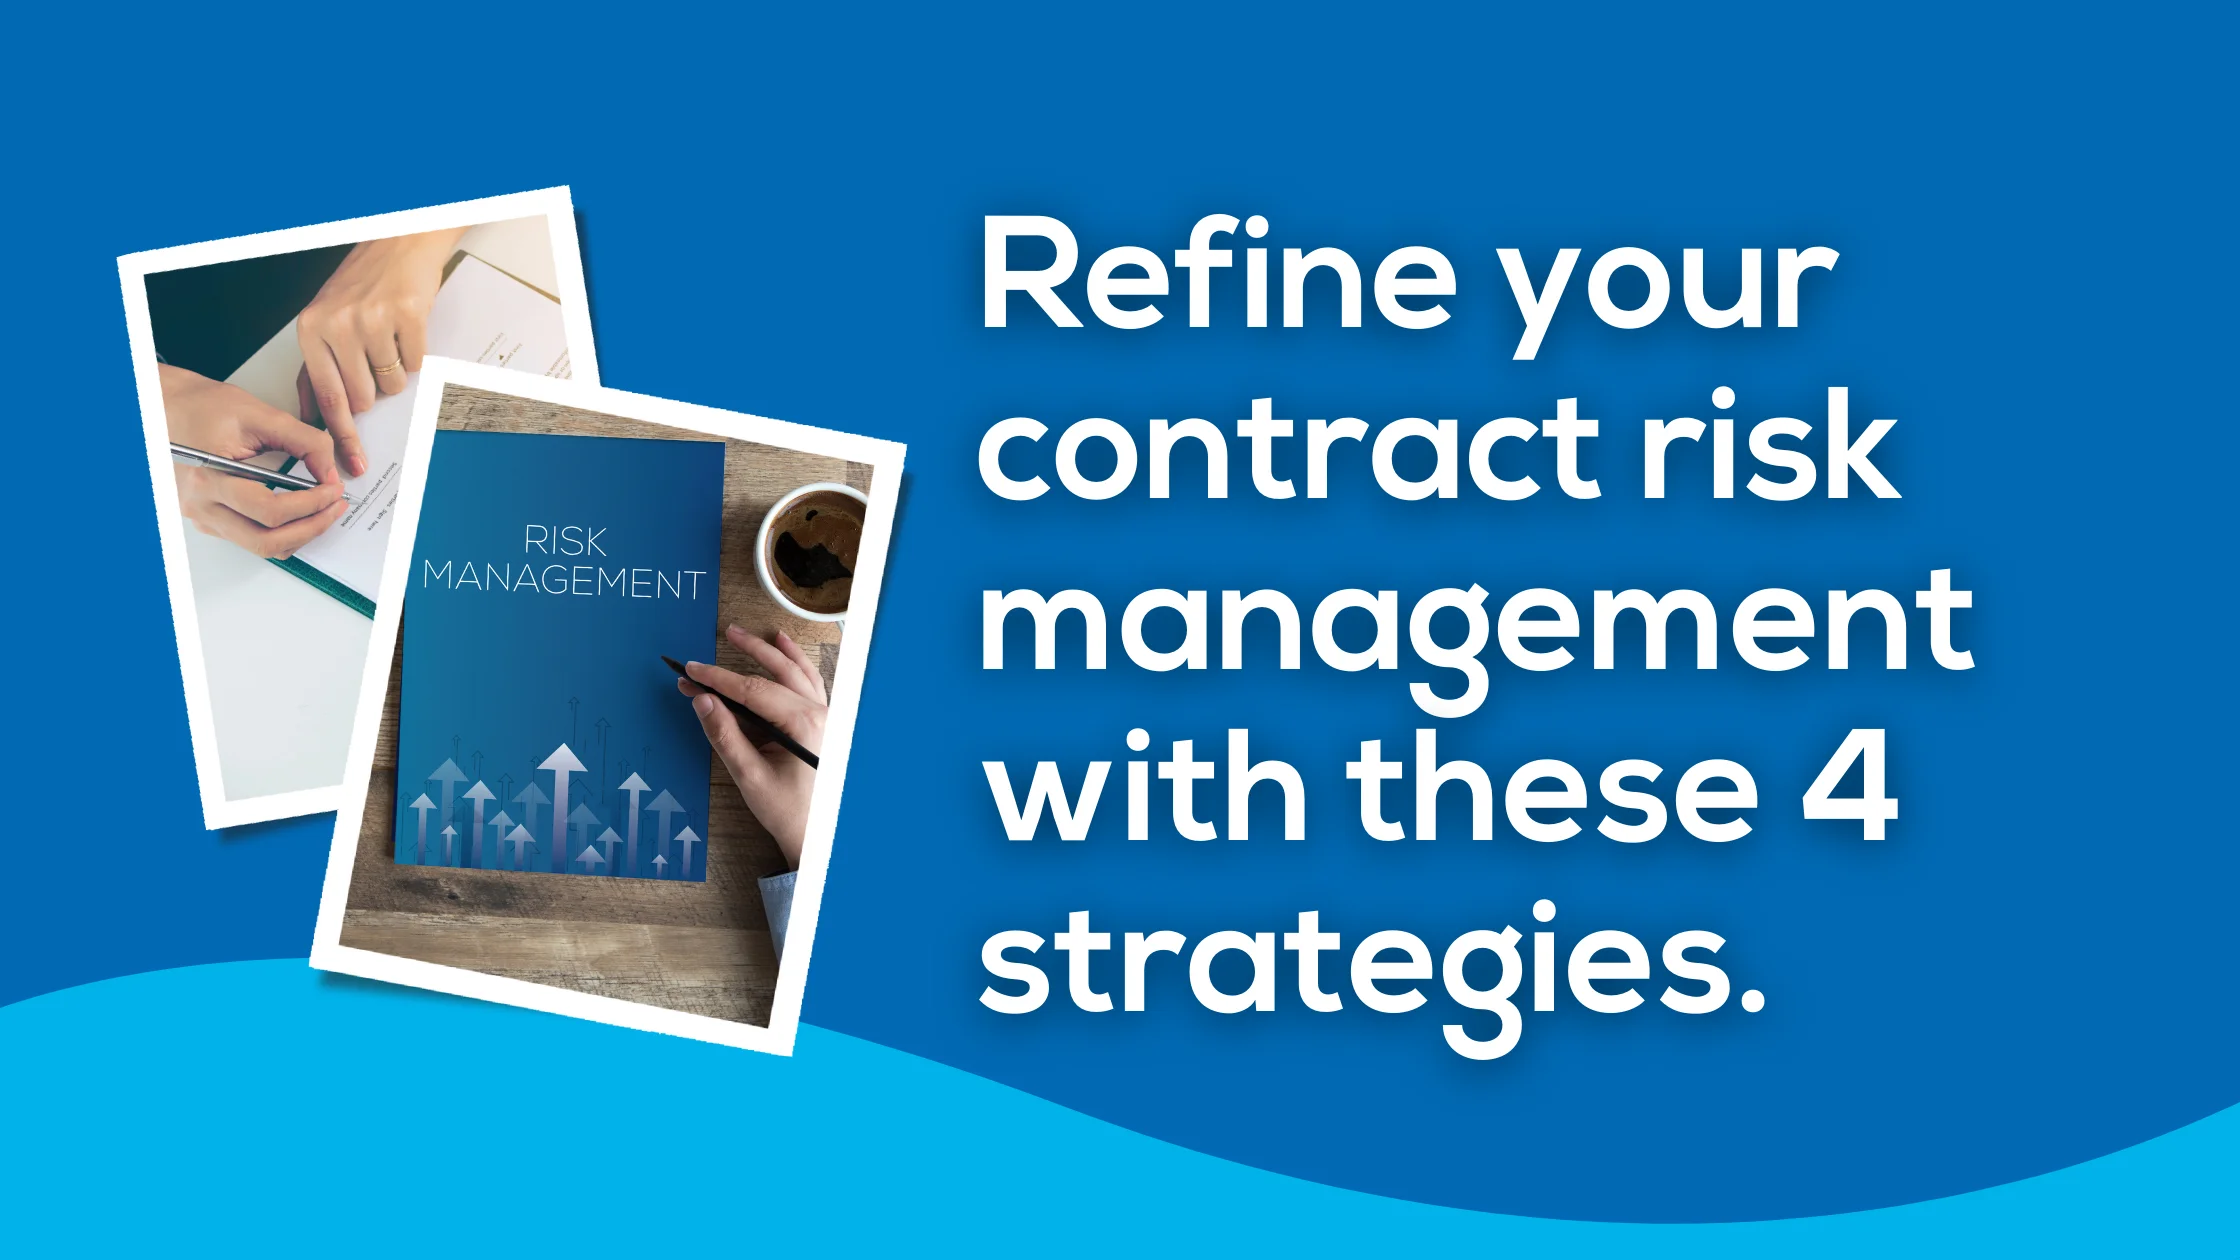 Refine your contract risk management with these 4 strategies.